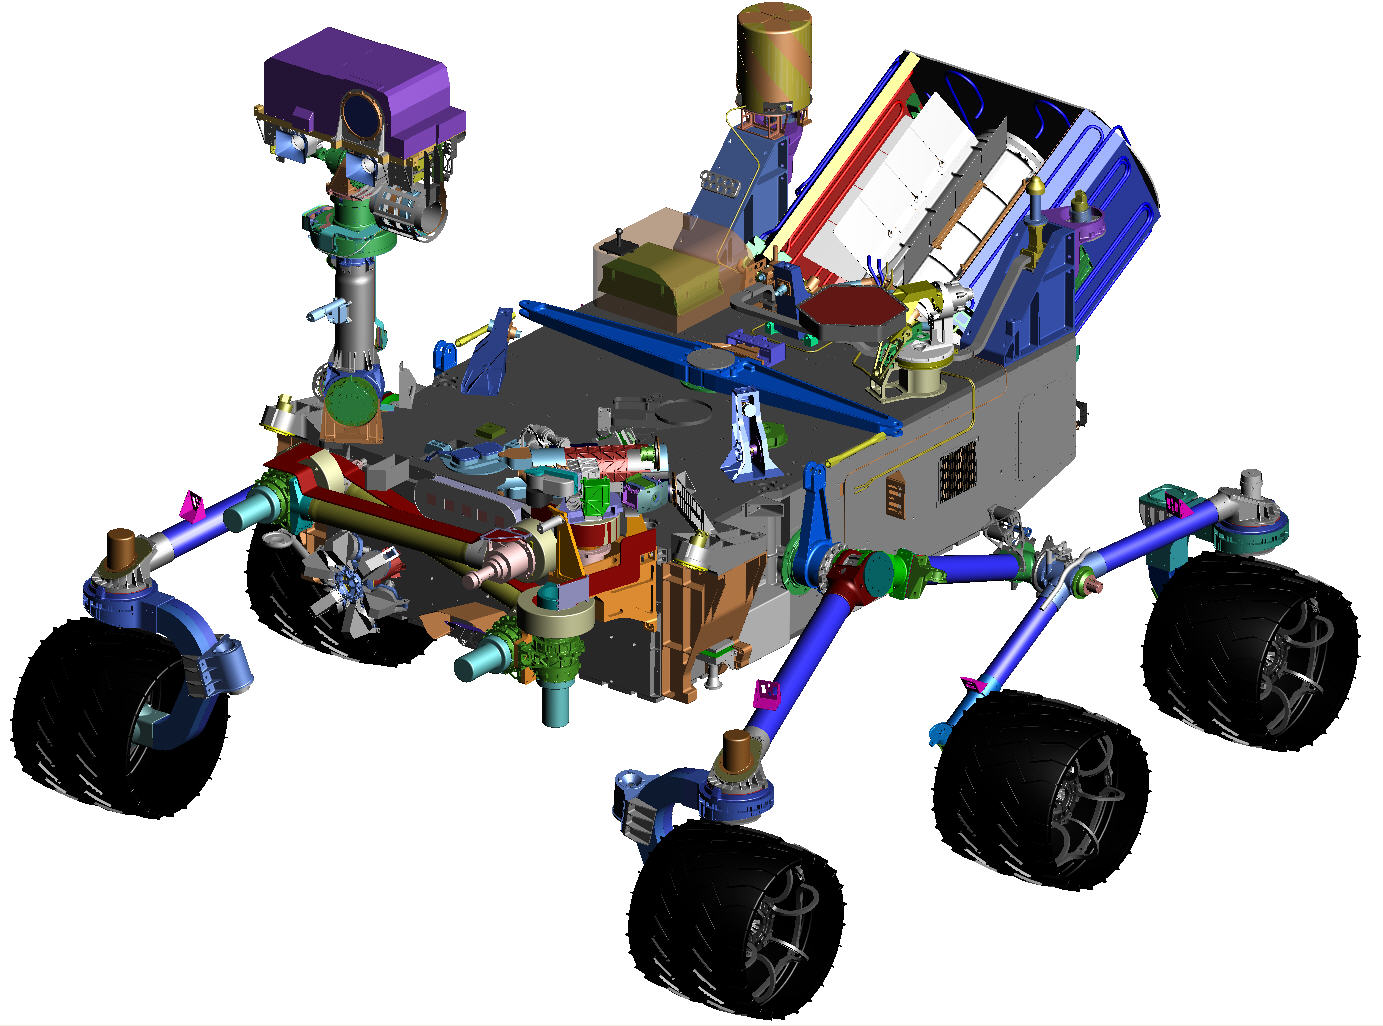 Rover-with-Siemens-CAD.jpg